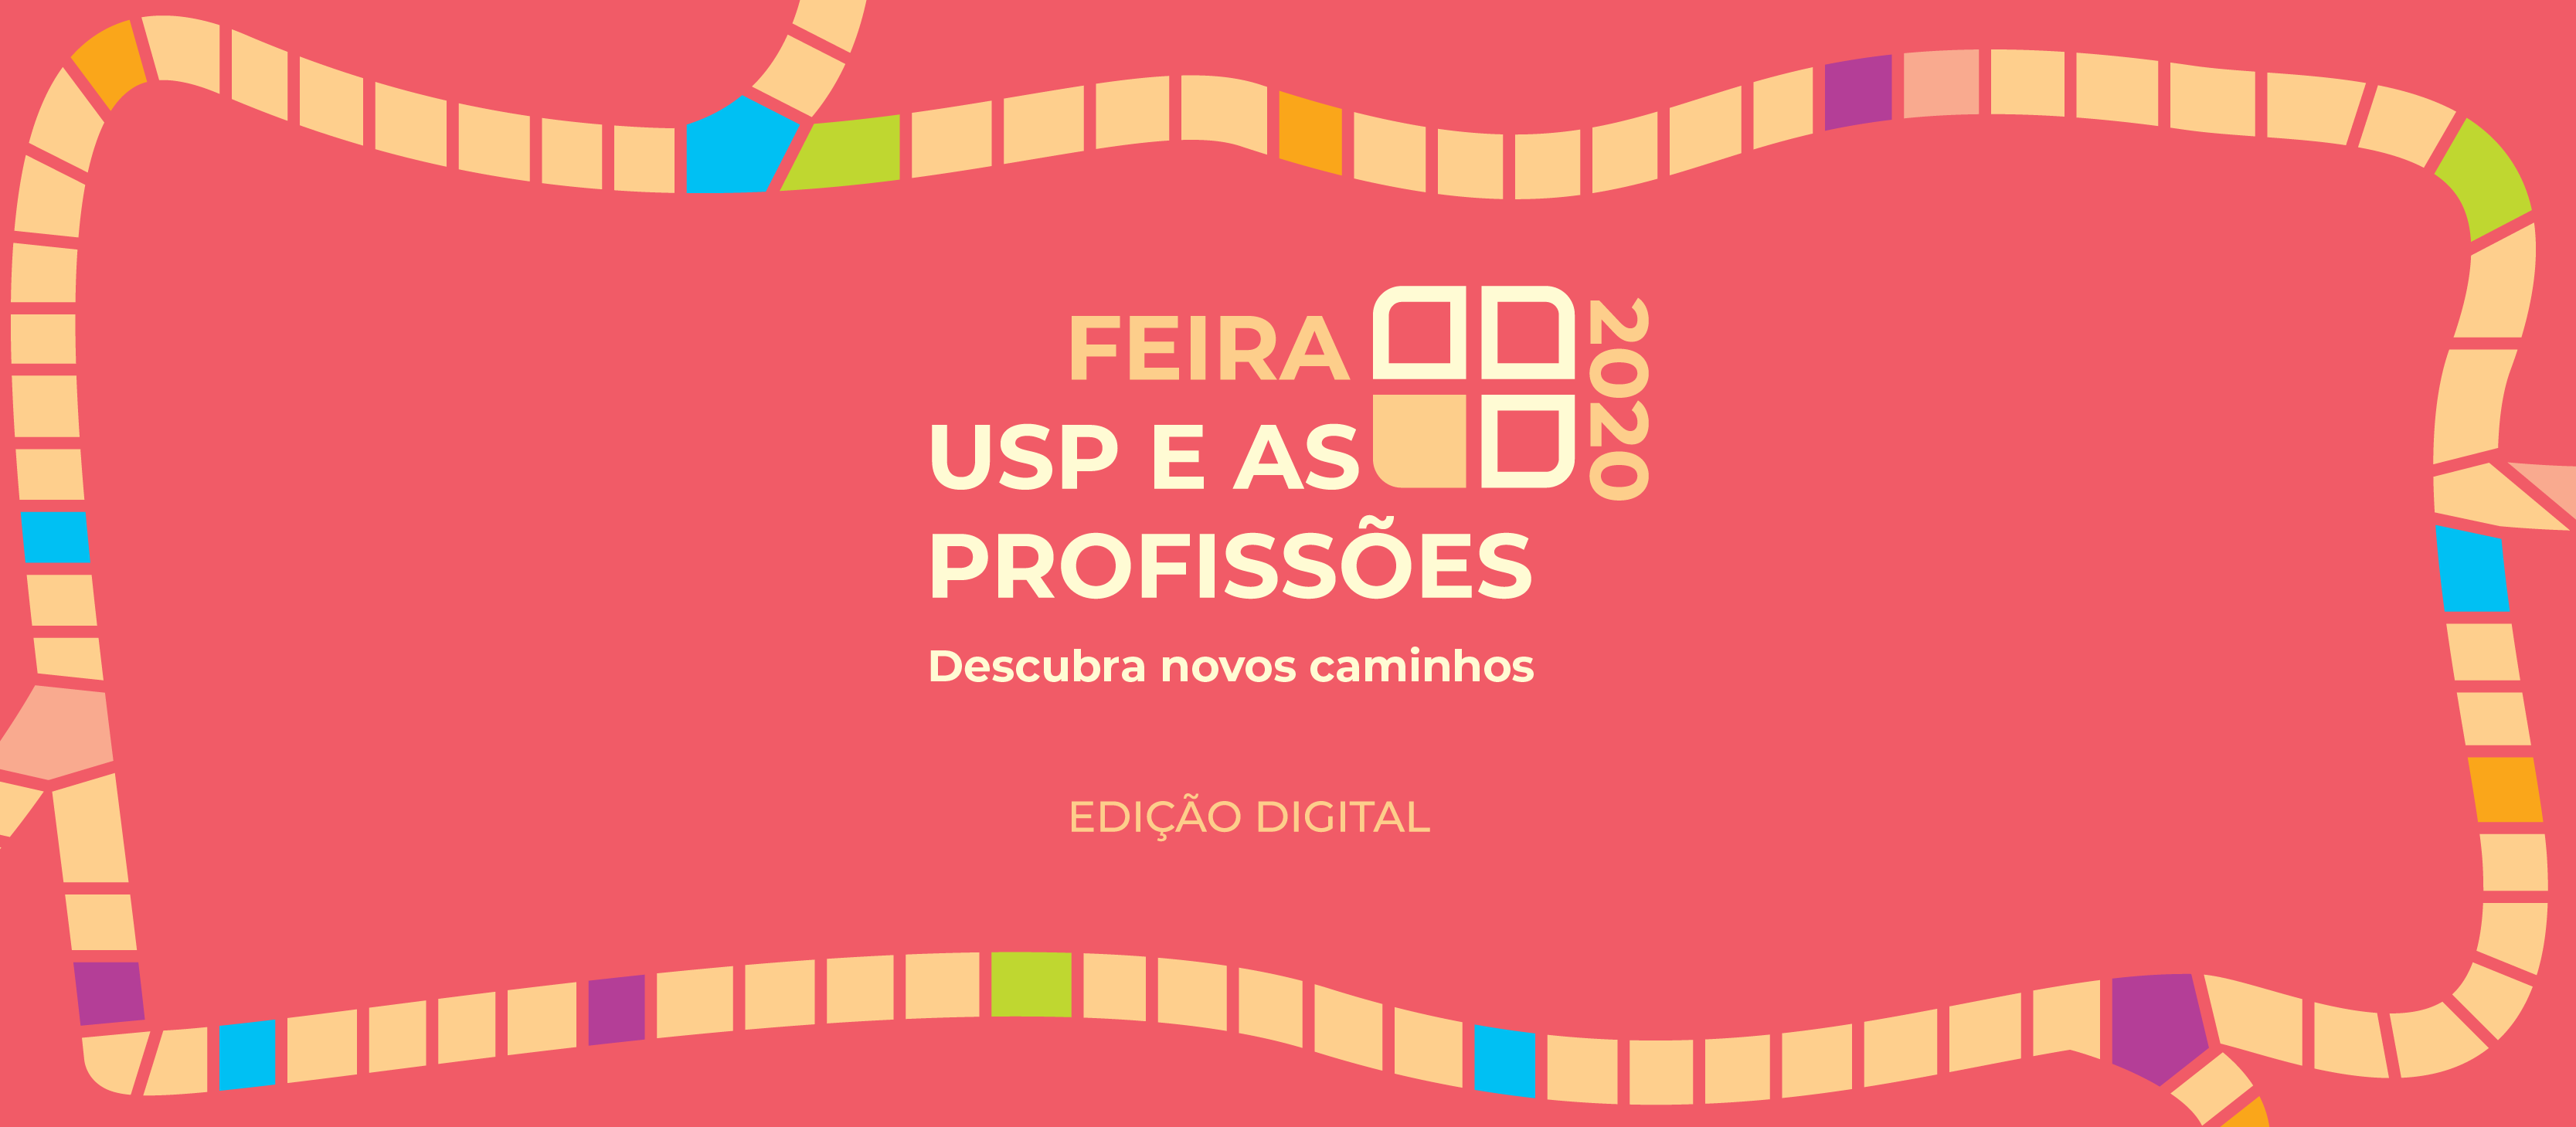 USP Professions Fair online version expands through all of Brazil and 40 other countries